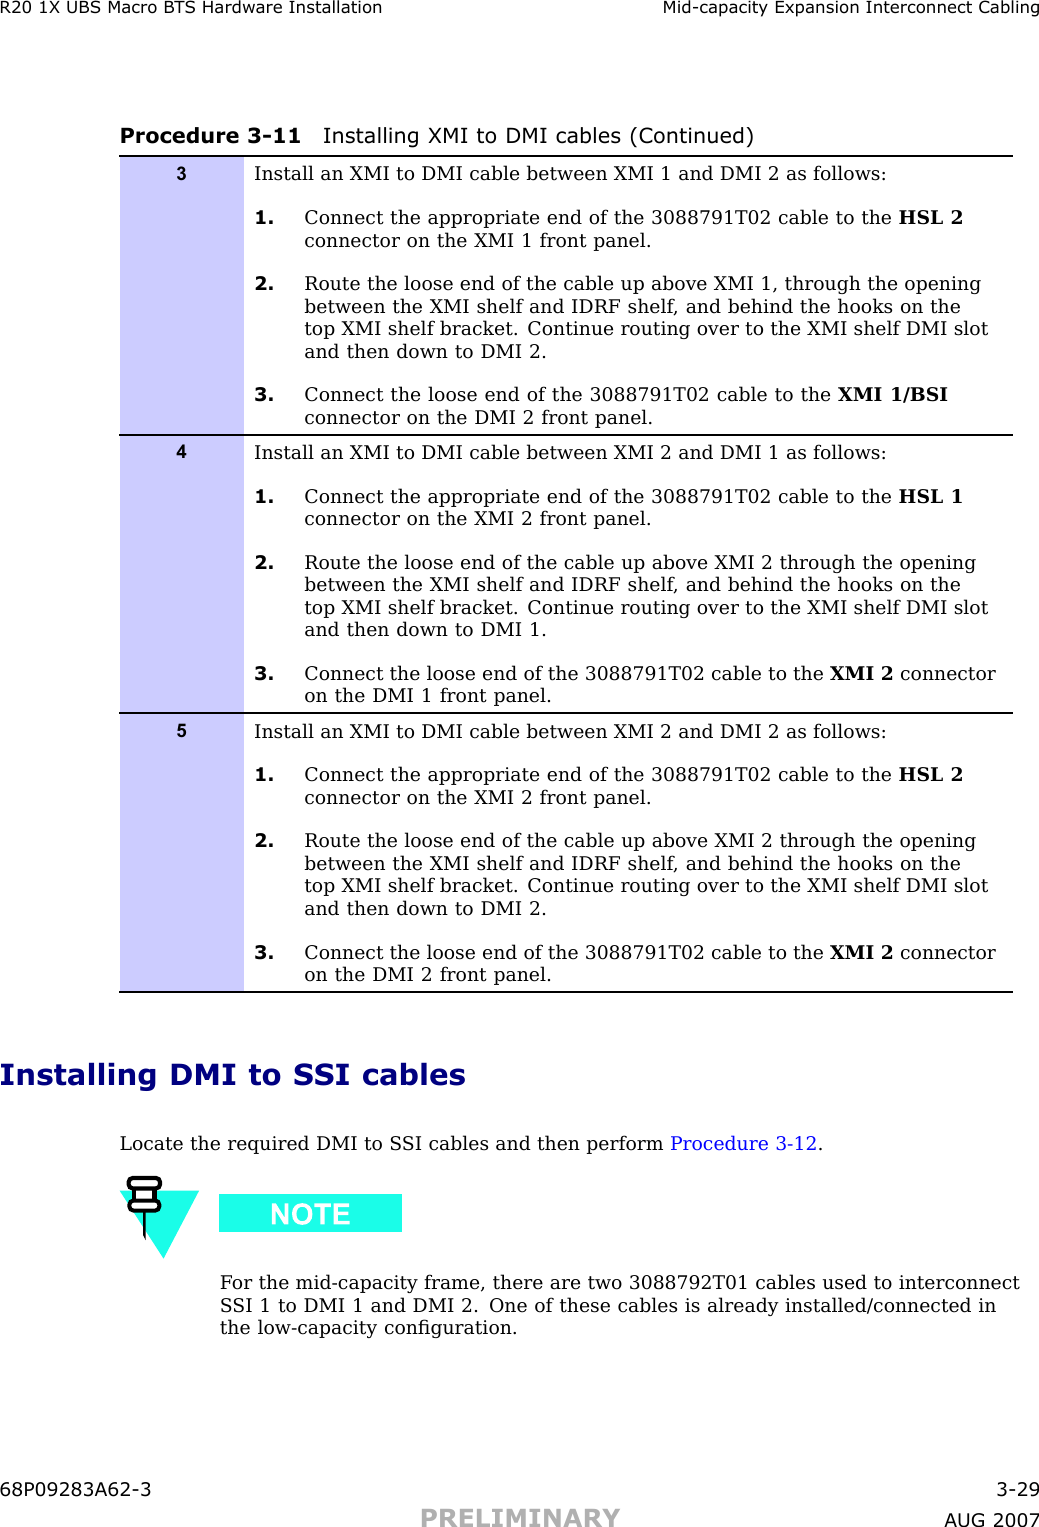 R20 1X UBS Macro B T S Hardw are Installation Mid -capacit y Expansion Interconnect CablingProcedure 3 -11 Installing XMI to DMI cables (Continued)3Install an XMI to DMI cable between XMI 1 and DMI 2 as follows:1. Connect the appropriate end of the 3088791T02 cable to the HSL 2connector on the XMI 1 front panel.2. Route the loose end of the cable up above XMI 1, through the openingbetween the XMI shelf and IDRF shelf , and behind the hooks on thetop XMI shelf bracket. Continue routing over to the XMI shelf DMI slotand then down to DMI 2.3. Connect the loose end of the 3088791T02 cable to the XMI 1/BSIconnector on the DMI 2 front panel.4Install an XMI to DMI cable between XMI 2 and DMI 1 as follows:1. Connect the appropriate end of the 3088791T02 cable to the HSL 1connector on the XMI 2 front panel.2. Route the loose end of the cable up above XMI 2 through the openingbetween the XMI shelf and IDRF shelf , and behind the hooks on thetop XMI shelf bracket. Continue routing over to the XMI shelf DMI slotand then down to DMI 1.3. Connect the loose end of the 3088791T02 cable to the XMI 2 connectoron the DMI 1 front panel.5Install an XMI to DMI cable between XMI 2 and DMI 2 as follows:1. Connect the appropriate end of the 3088791T02 cable to the HSL 2connector on the XMI 2 front panel.2. Route the loose end of the cable up above XMI 2 through the openingbetween the XMI shelf and IDRF shelf , and behind the hooks on thetop XMI shelf bracket. Continue routing over to the XMI shelf DMI slotand then down to DMI 2.3. Connect the loose end of the 3088791T02 cable to the XMI 2 connectoron the DMI 2 front panel.Installing DMI to SSI cablesLocate the required DMI to S SI cables and then perform Procedure 3 -12 .F or the mid -capacity frame, there are two 3088792T01 cables used to interconnectS SI 1 to DMI 1 and DMI 2. One of these cables is already installed/connected inthe low -capacity conﬁguration.68P09283A62 -3 3 -29PRELIMINARY A UG 2007